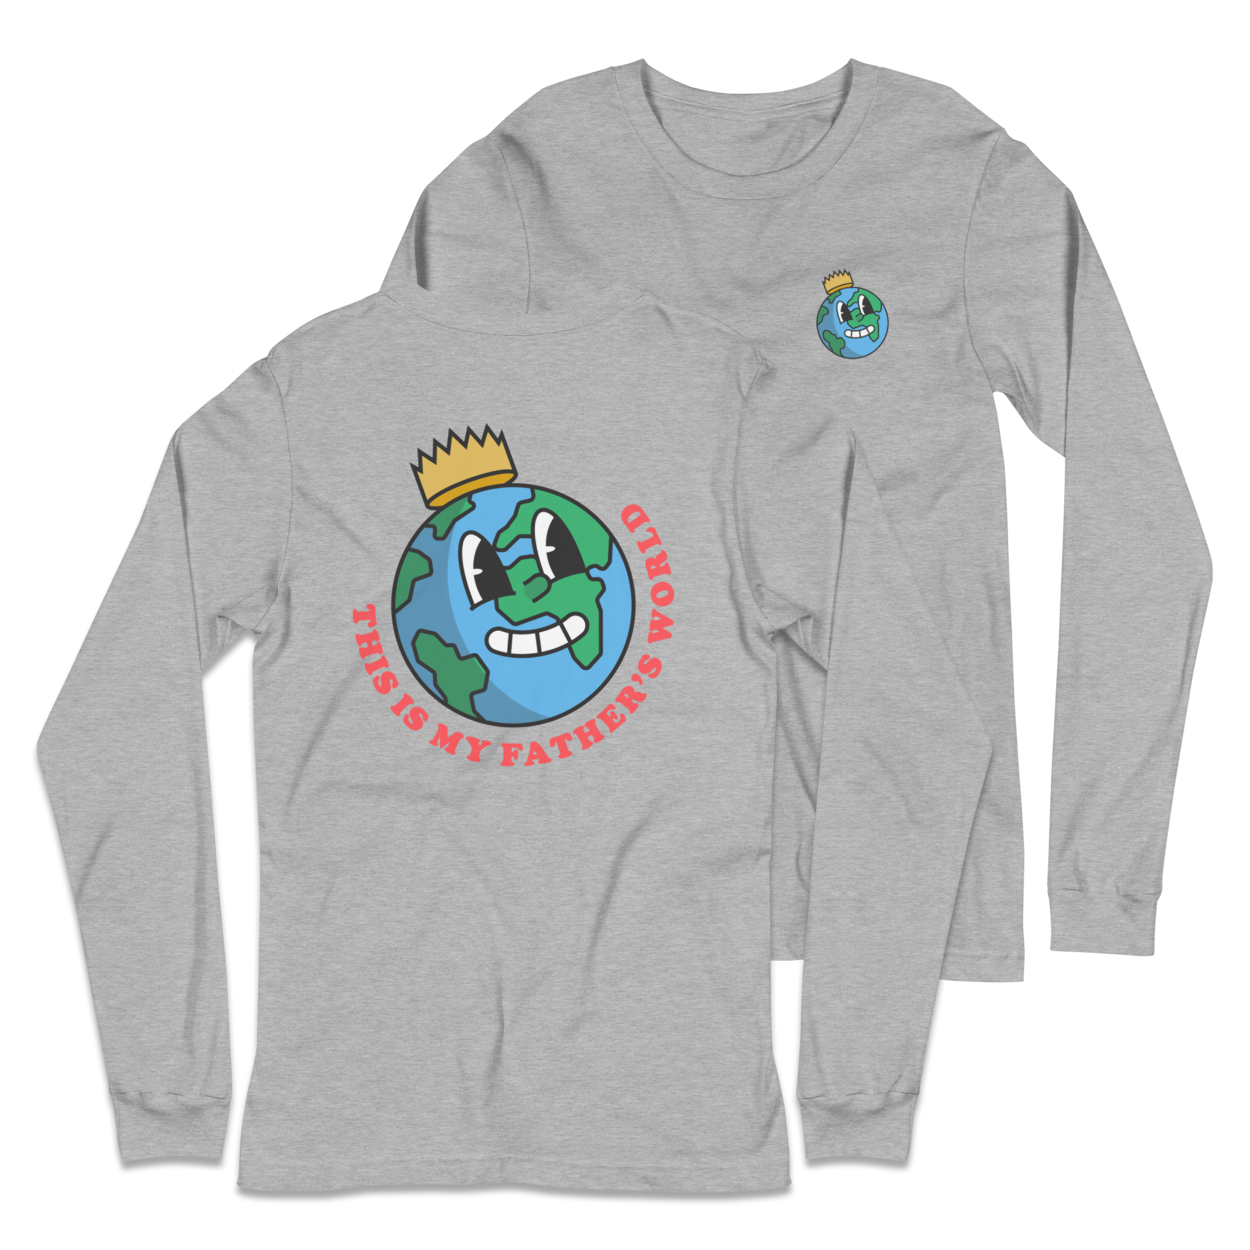 My Father's World Long Sleeve Shirt - 1689 Designs